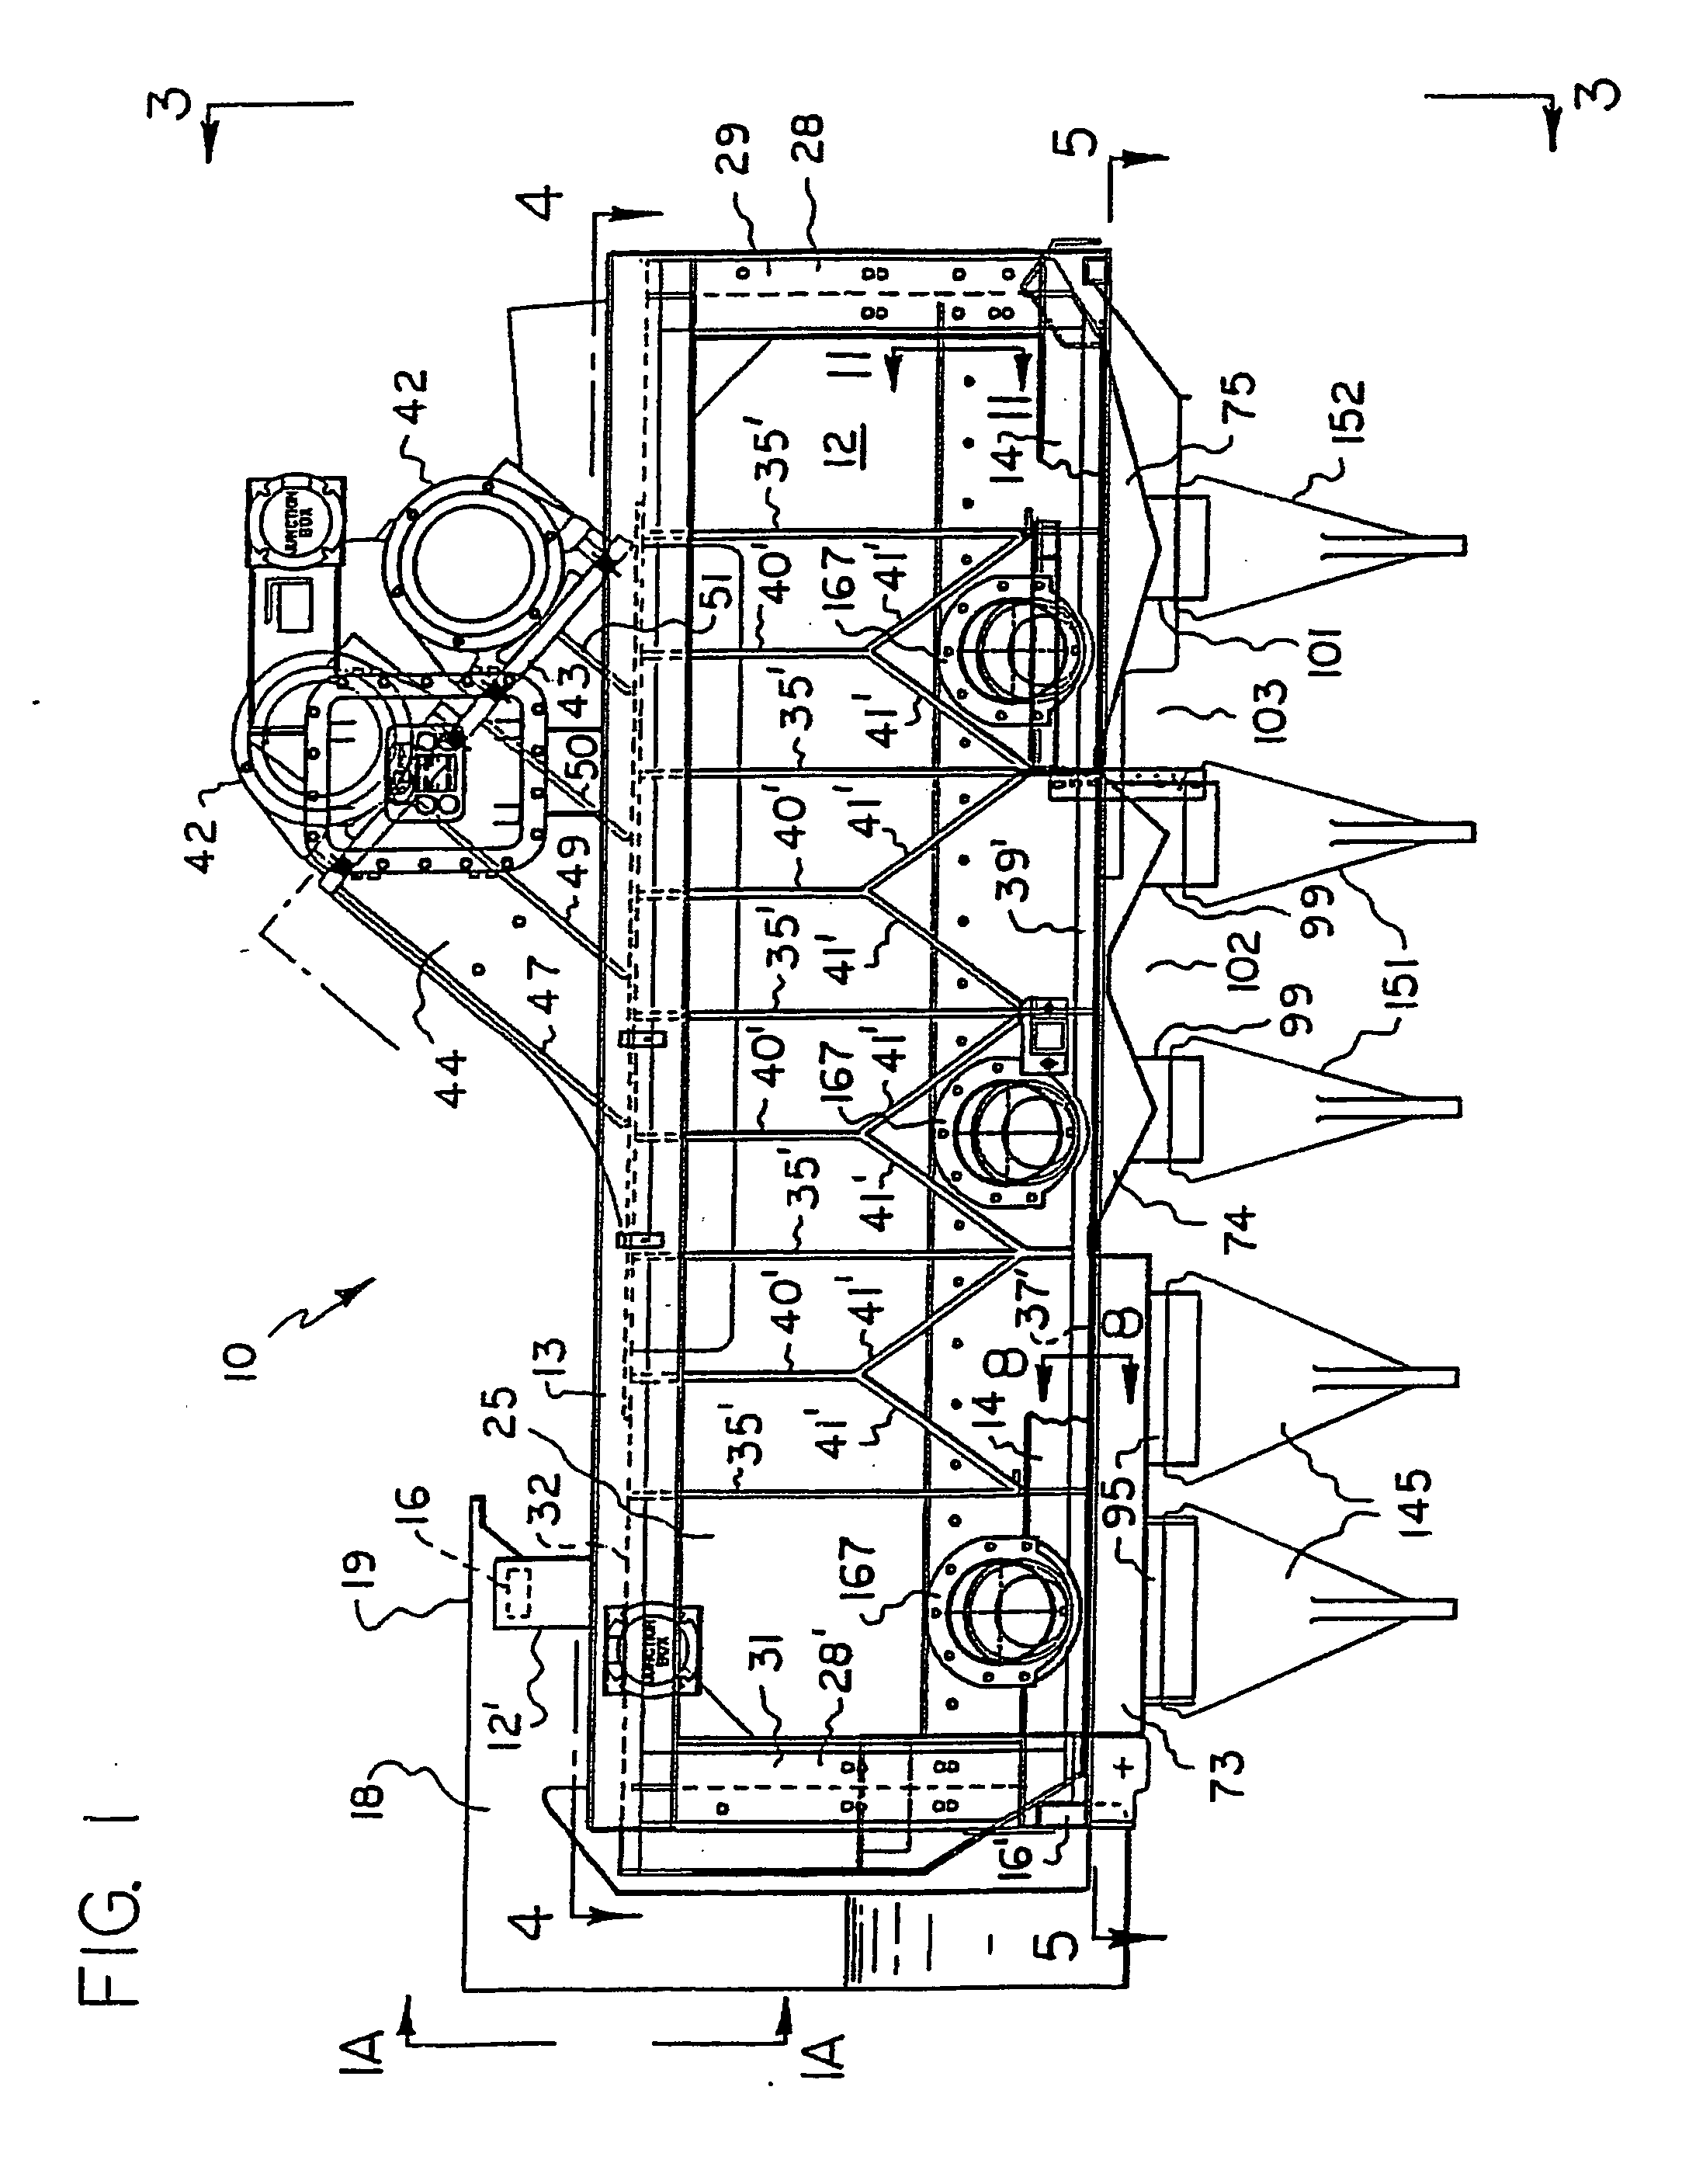 Vibratory screen assembly and method of manufacture